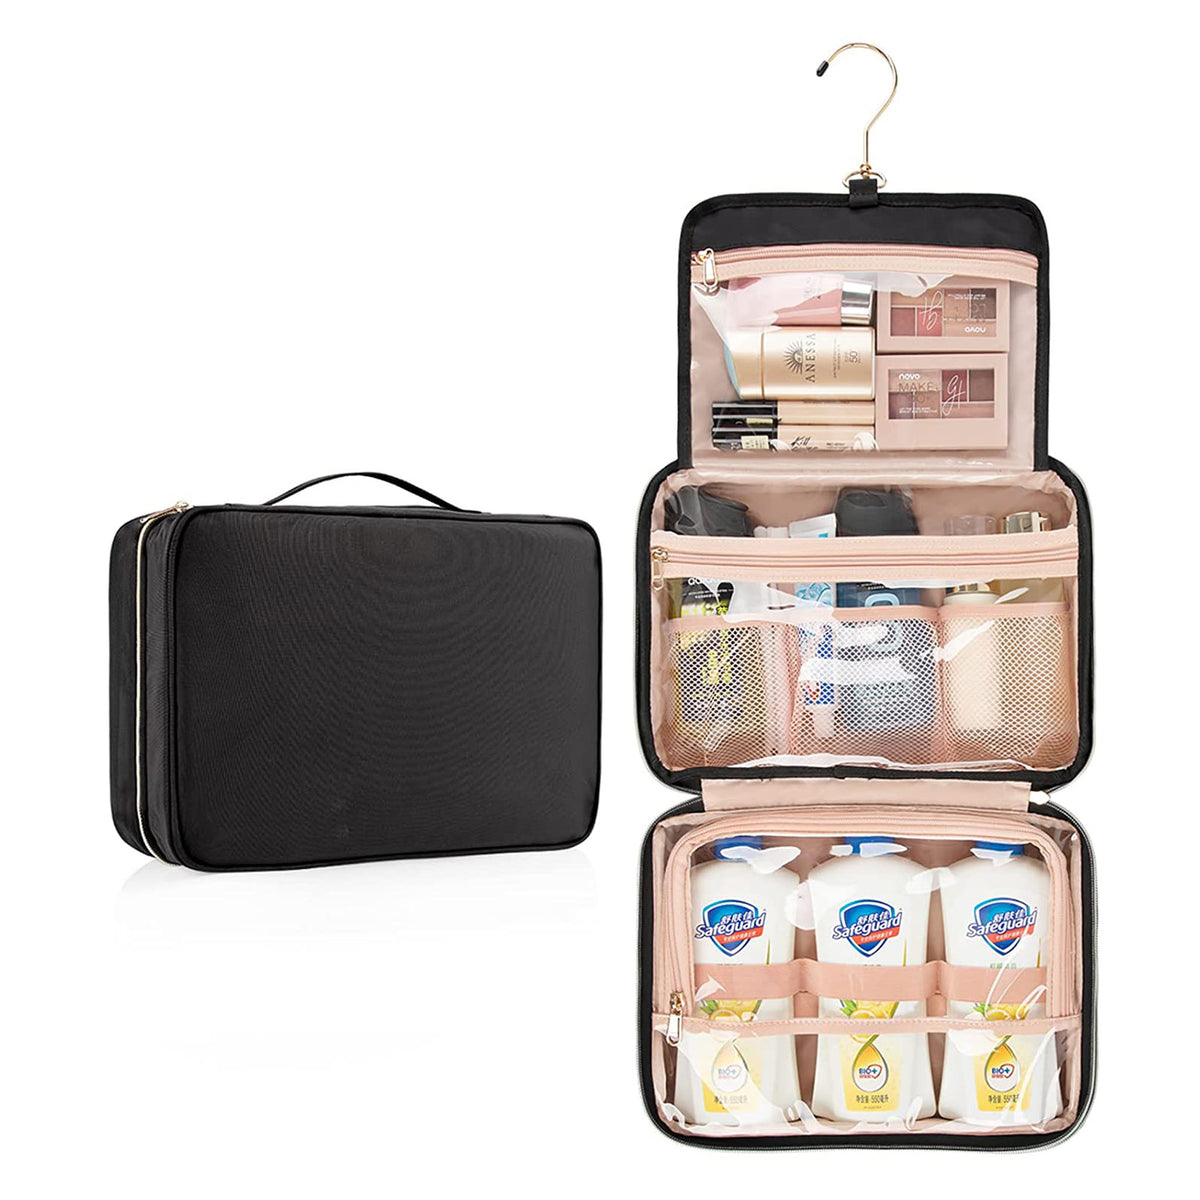 Cute Toiletry Bag Travel Bag With Hanging Hook, Water-resistant Makeup  Cosmetic Bag Travel Organizer For Accessories Shampoo Container Toiletries